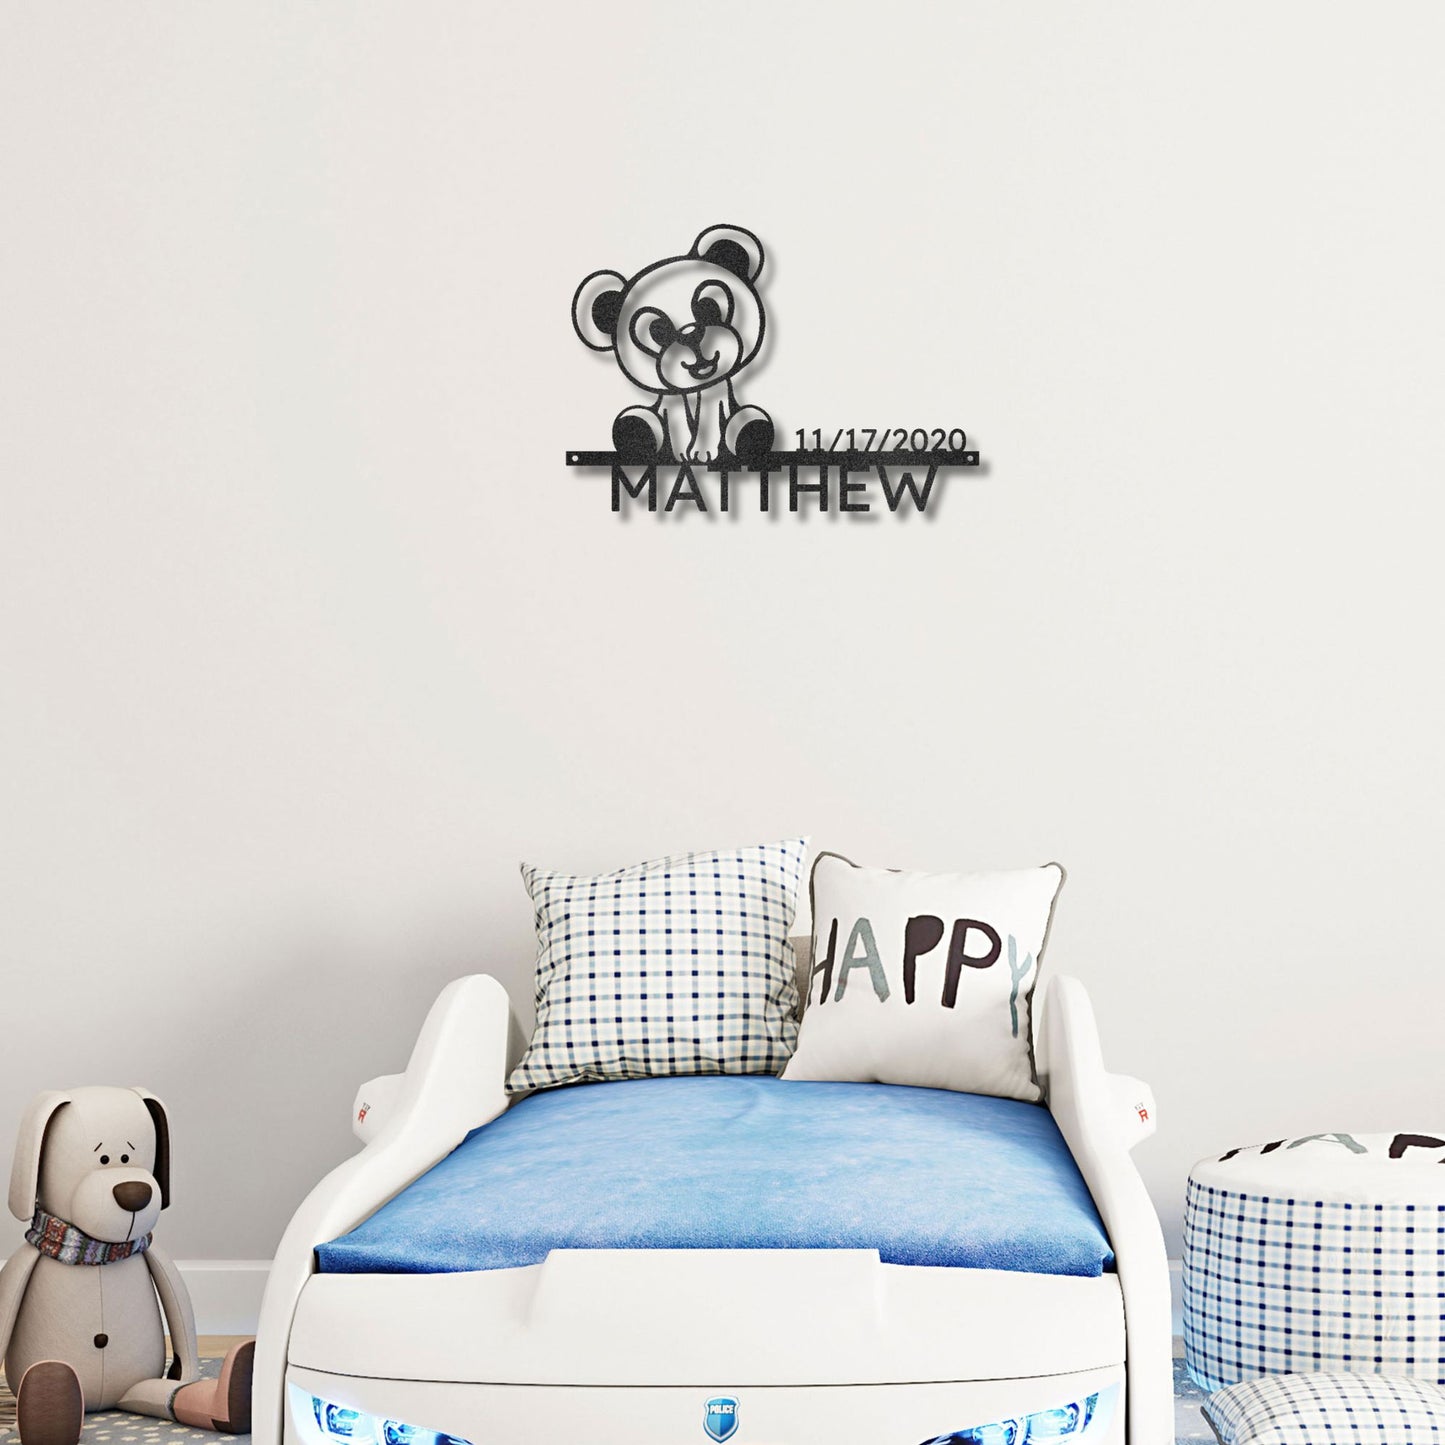 Timeless Teddy Bear: Personalized Metal Sign with Name & Birth Date